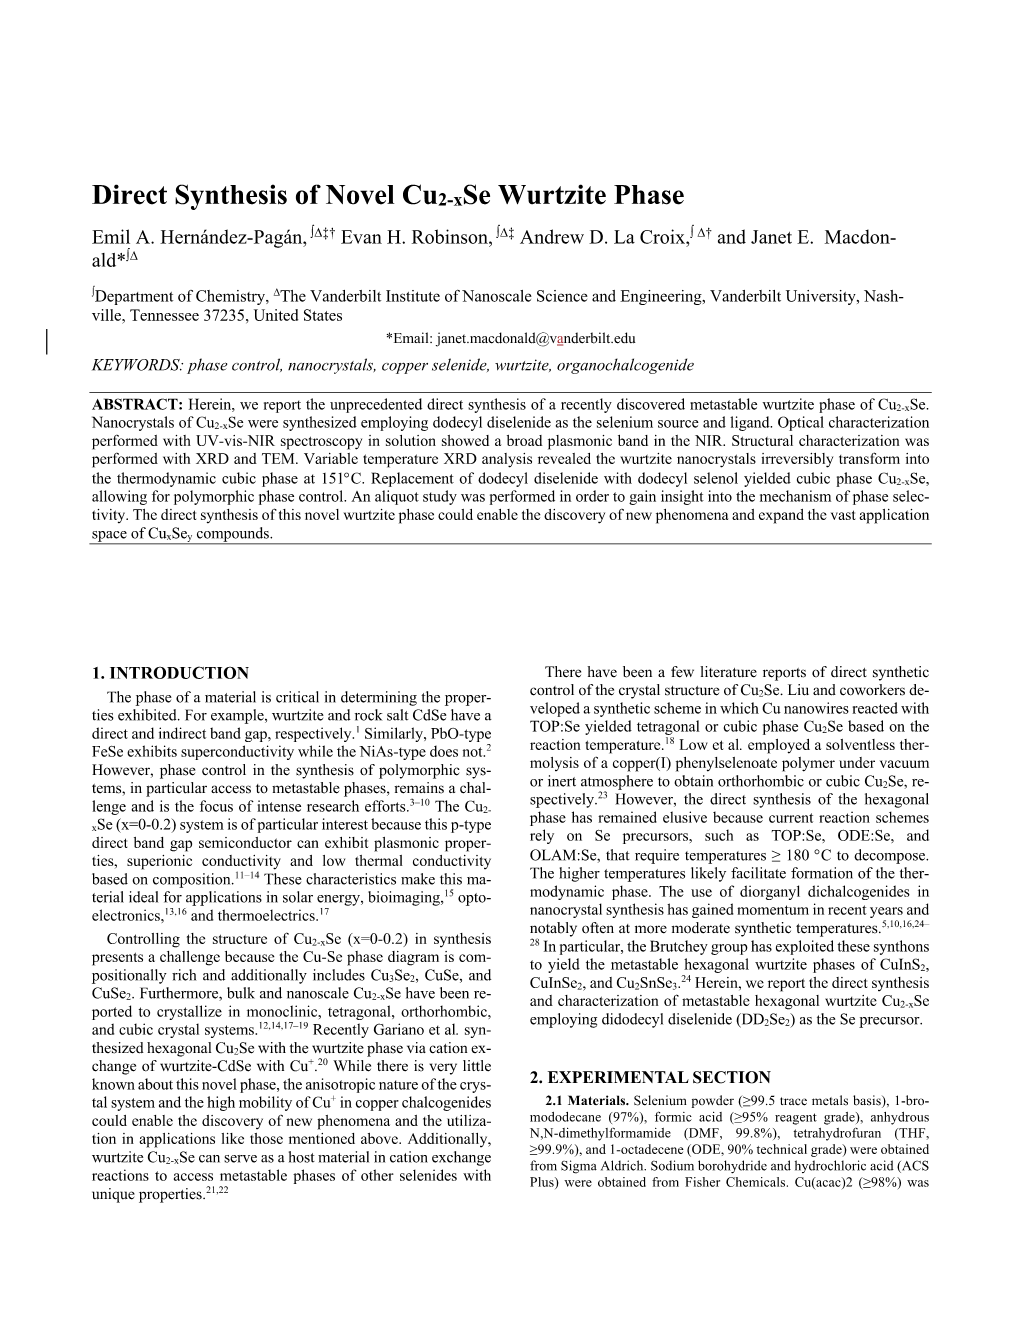 190506 Direct Synthesis of Novel Cu2-Xse Wurtzite Phase Repository